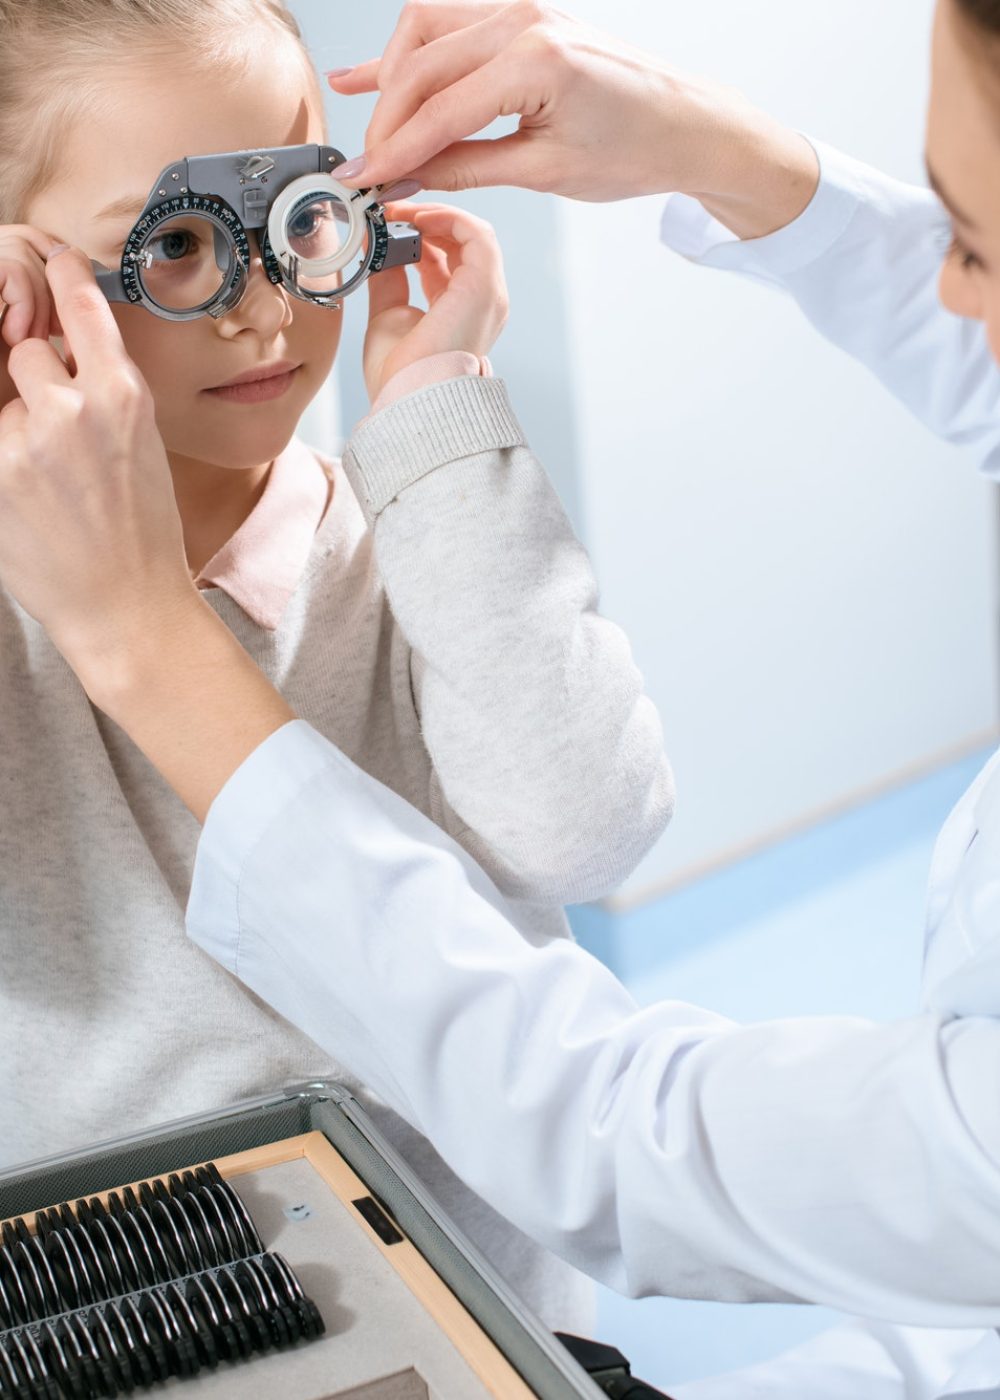 female ophthalmologist examining kid eyes with trial frame and lenses